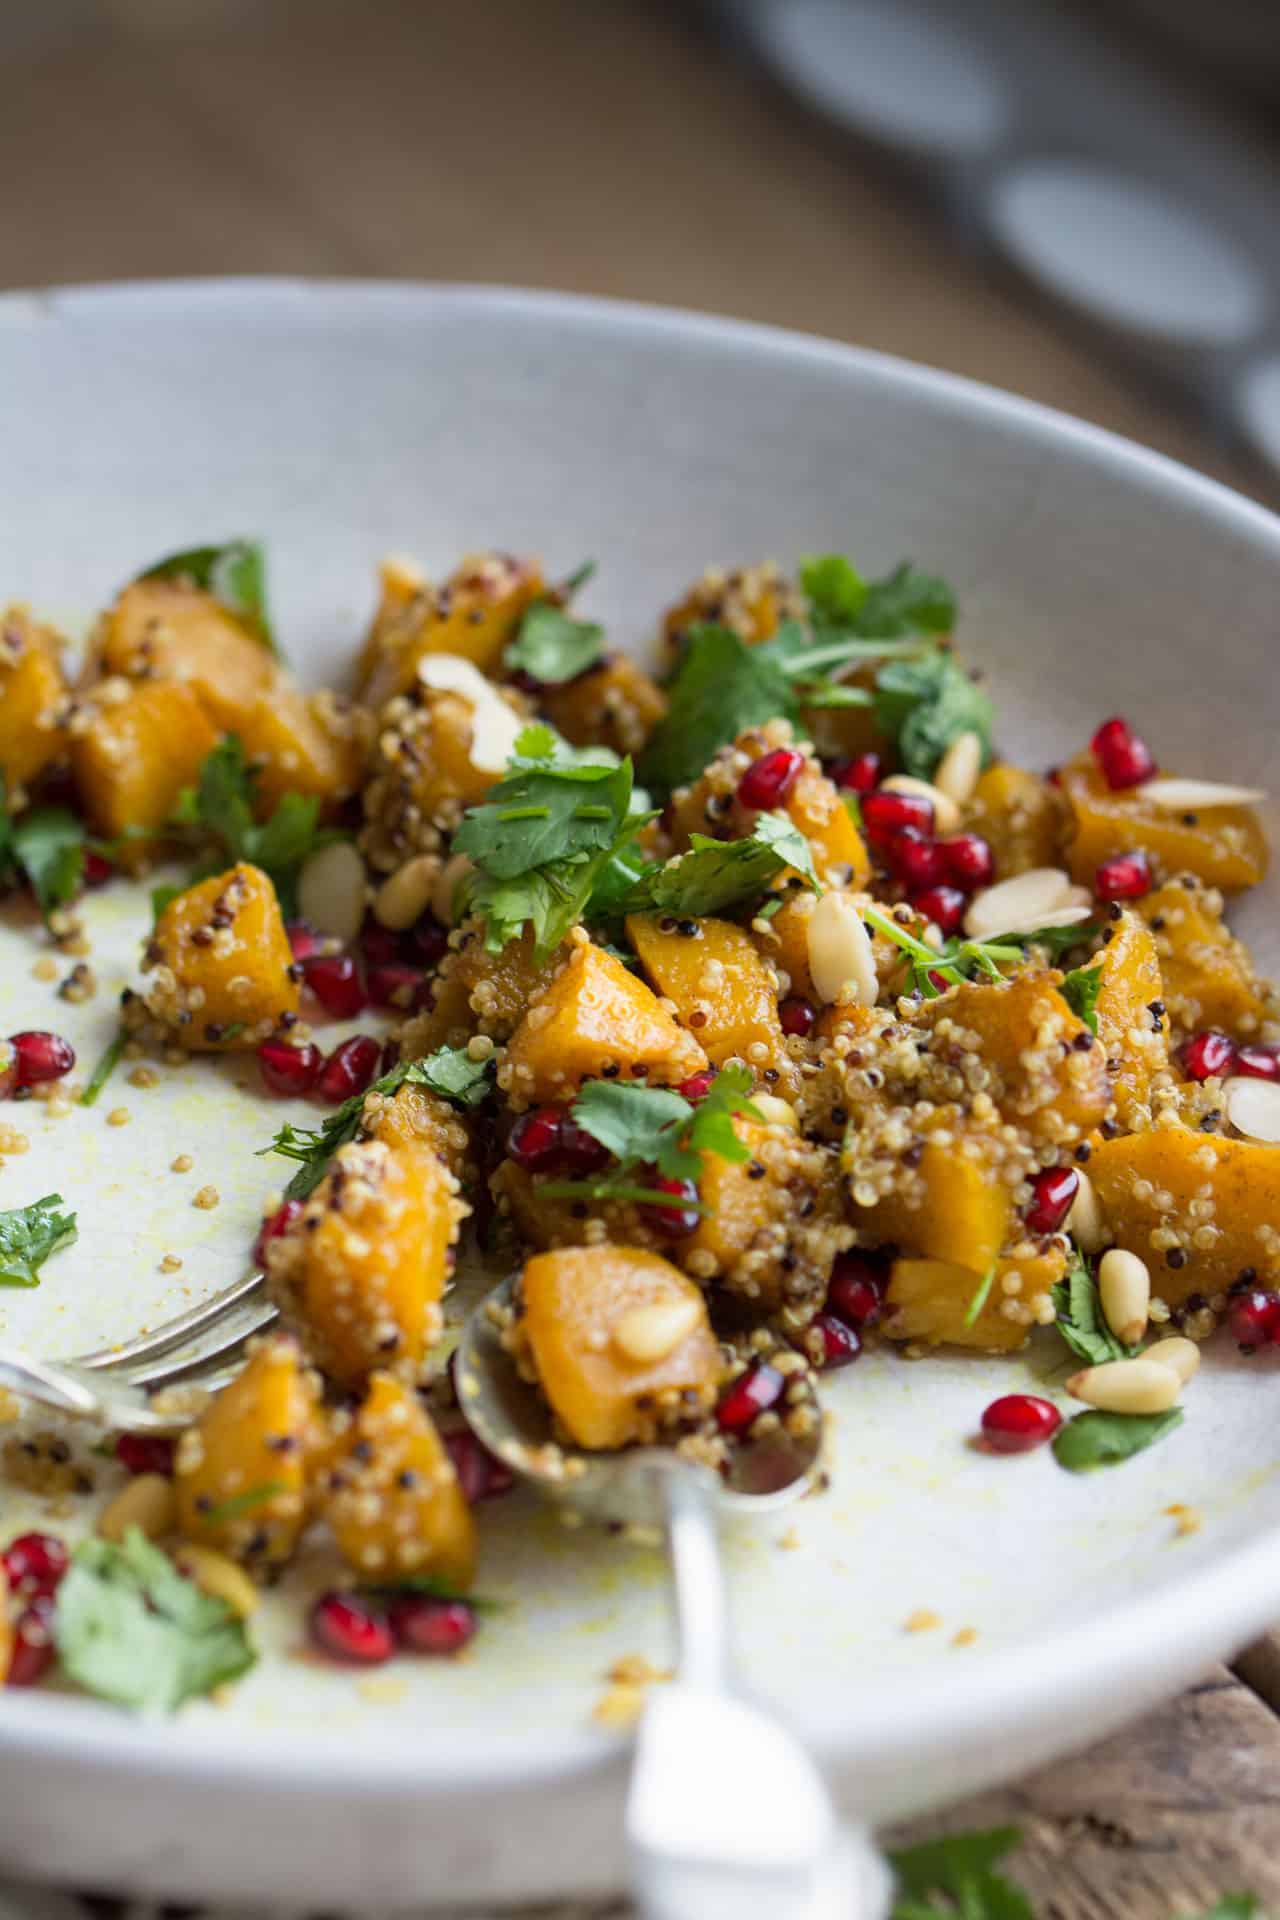 Autumn salad with pumpkin, quinoa and pomegranate in a bowl